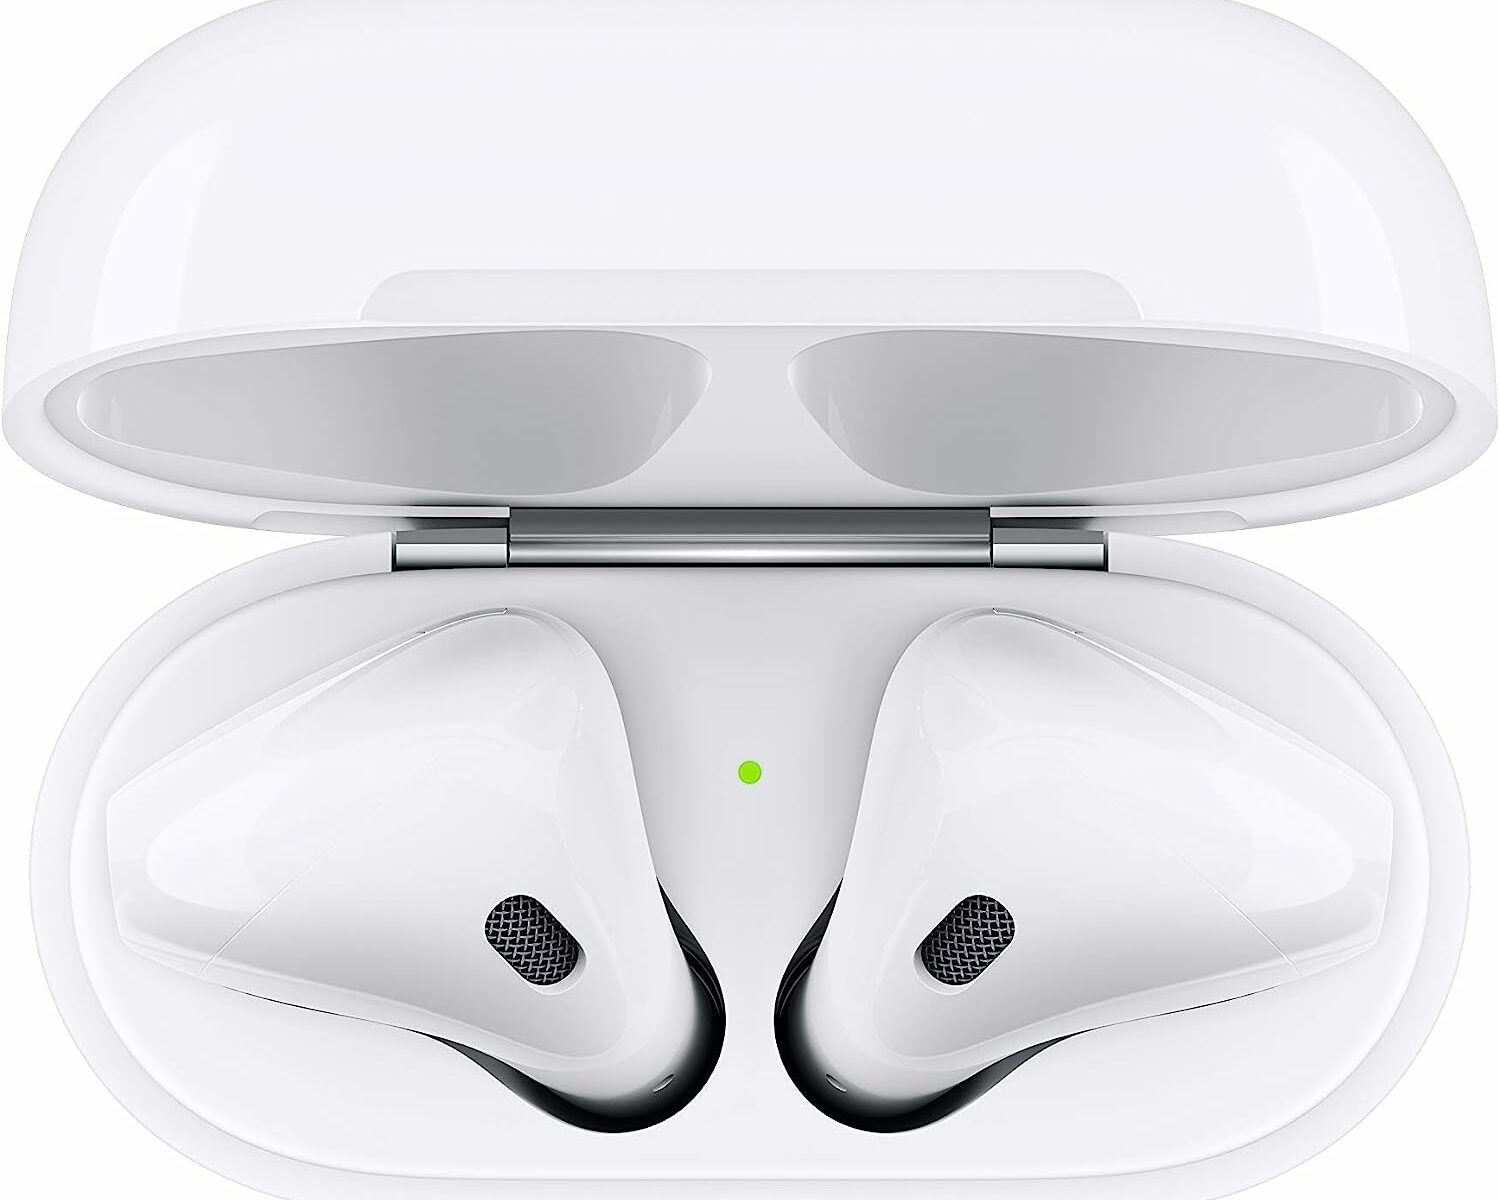 GOOD DEAL: - 21% on Apple AirPods with Wired Charging Case (2ᵉ generation)